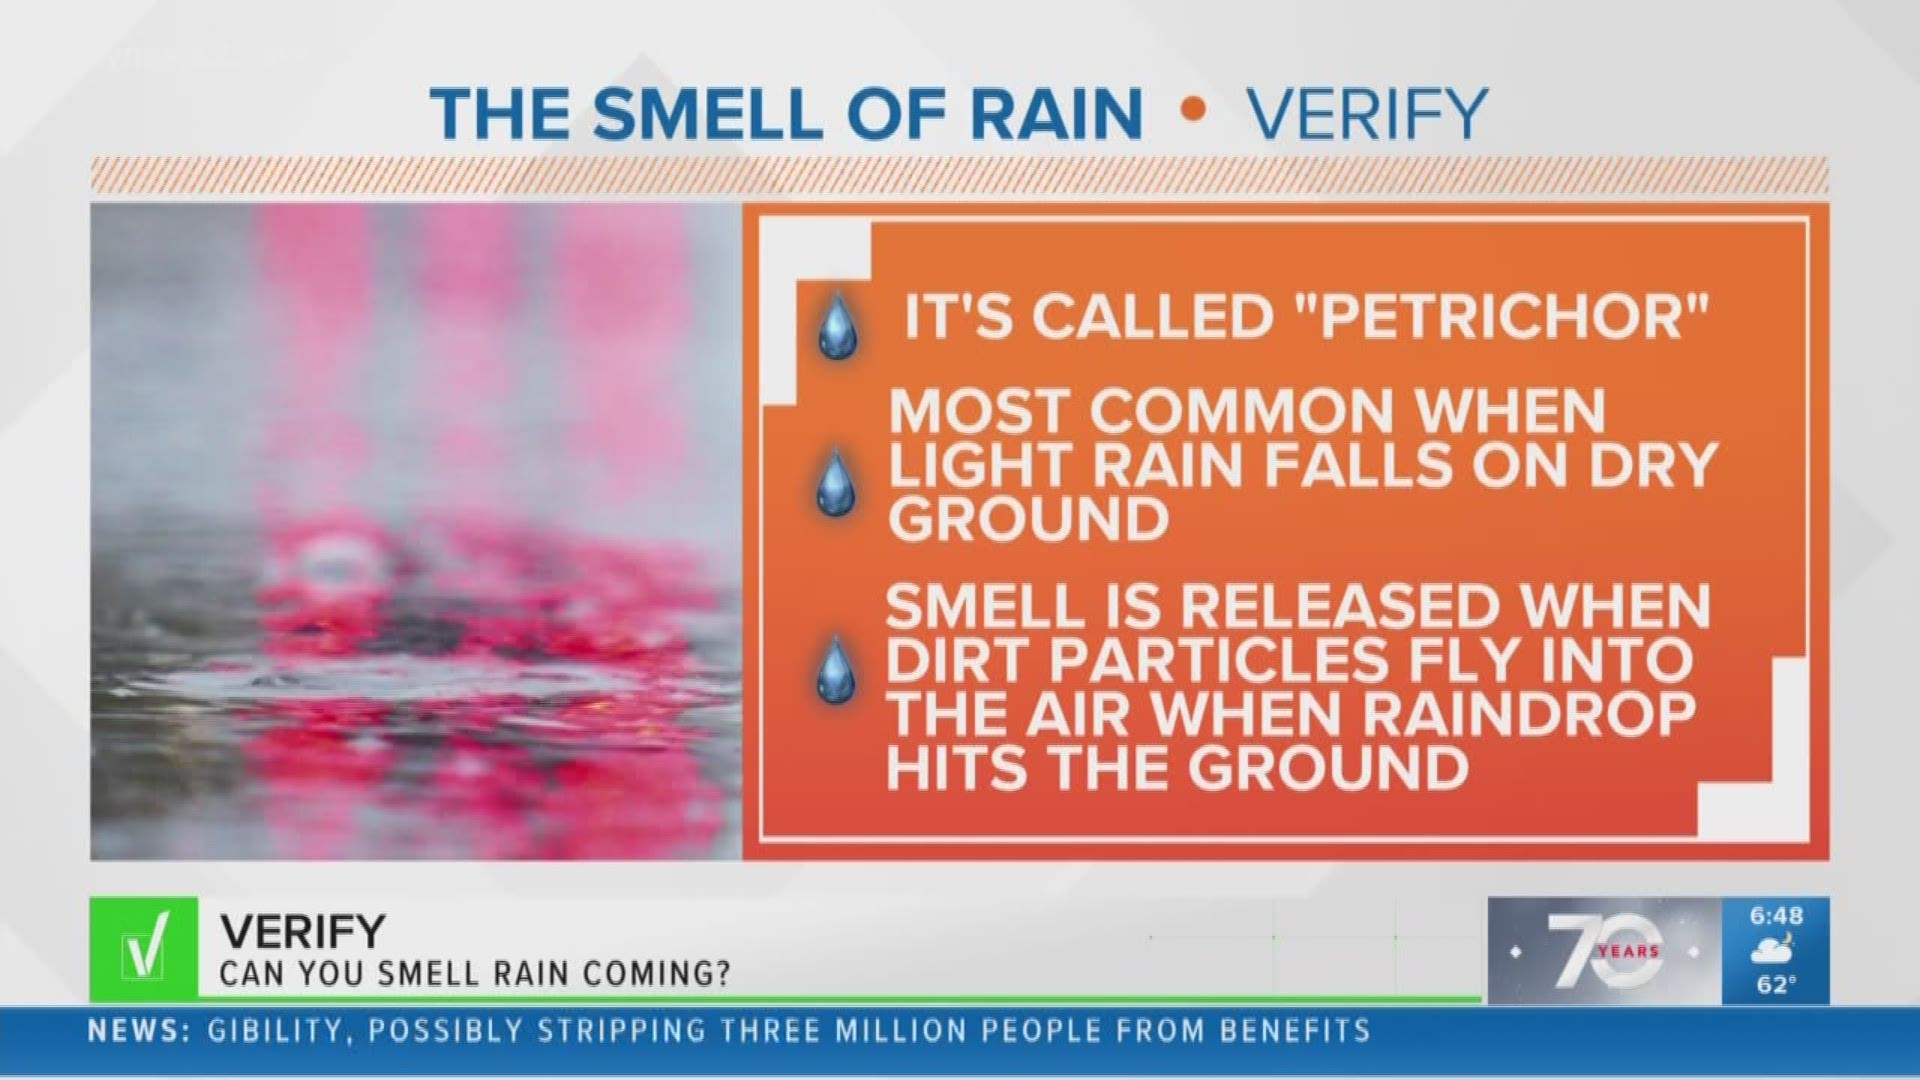 You ask; we VERIFY. If you think you “smell” rain coming, it’s not a figment of your imagination or a sixth sense. It is a real scientific phenomenon when rain reacts with soil.